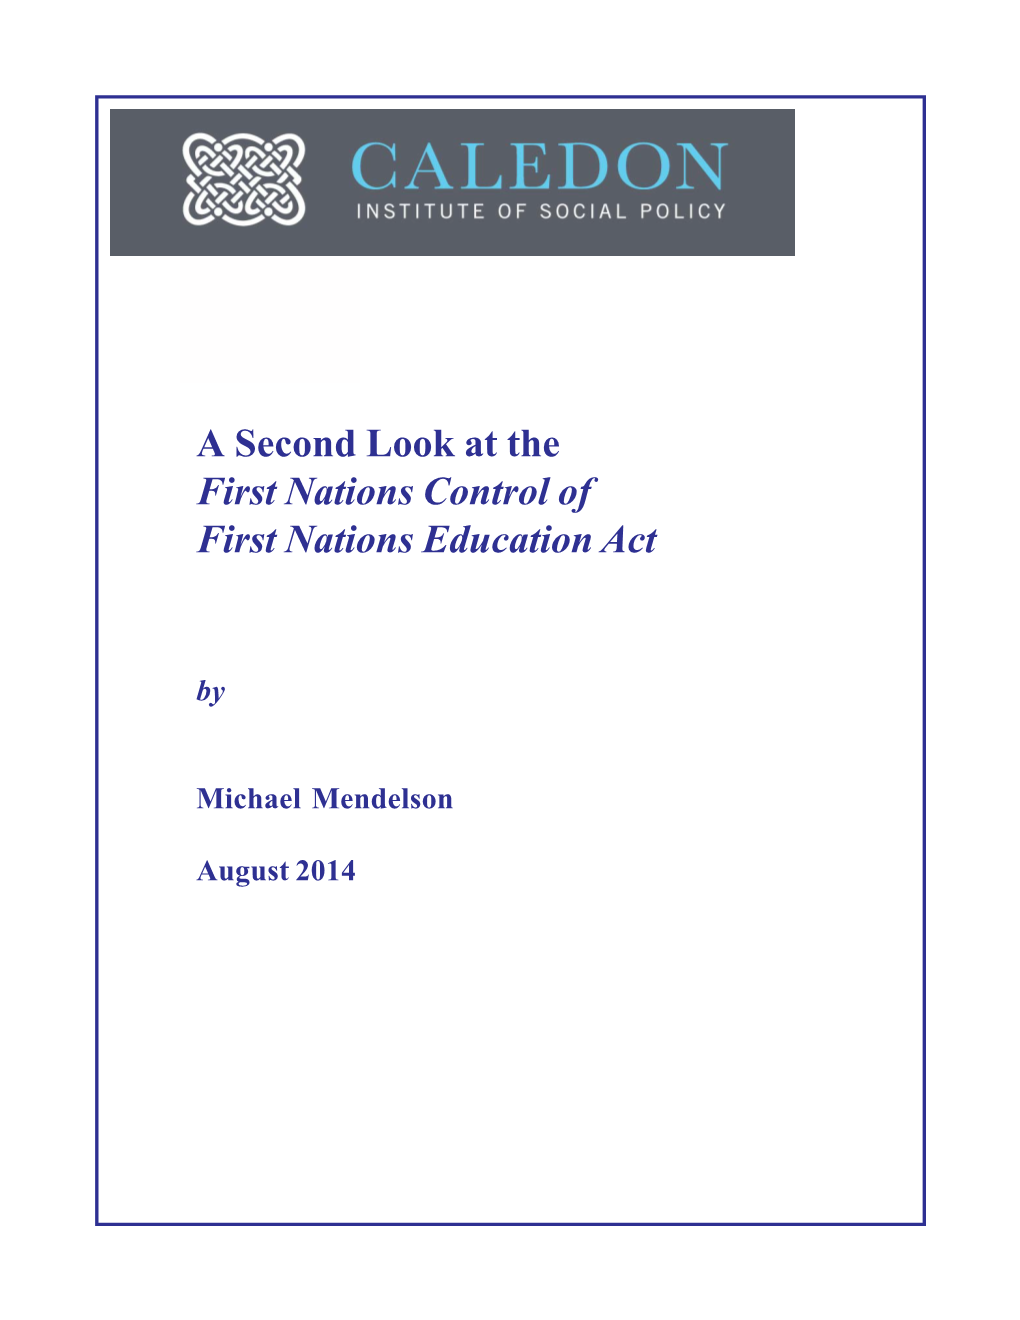 A Second Look at the First Nations Control of First Nations Education Act